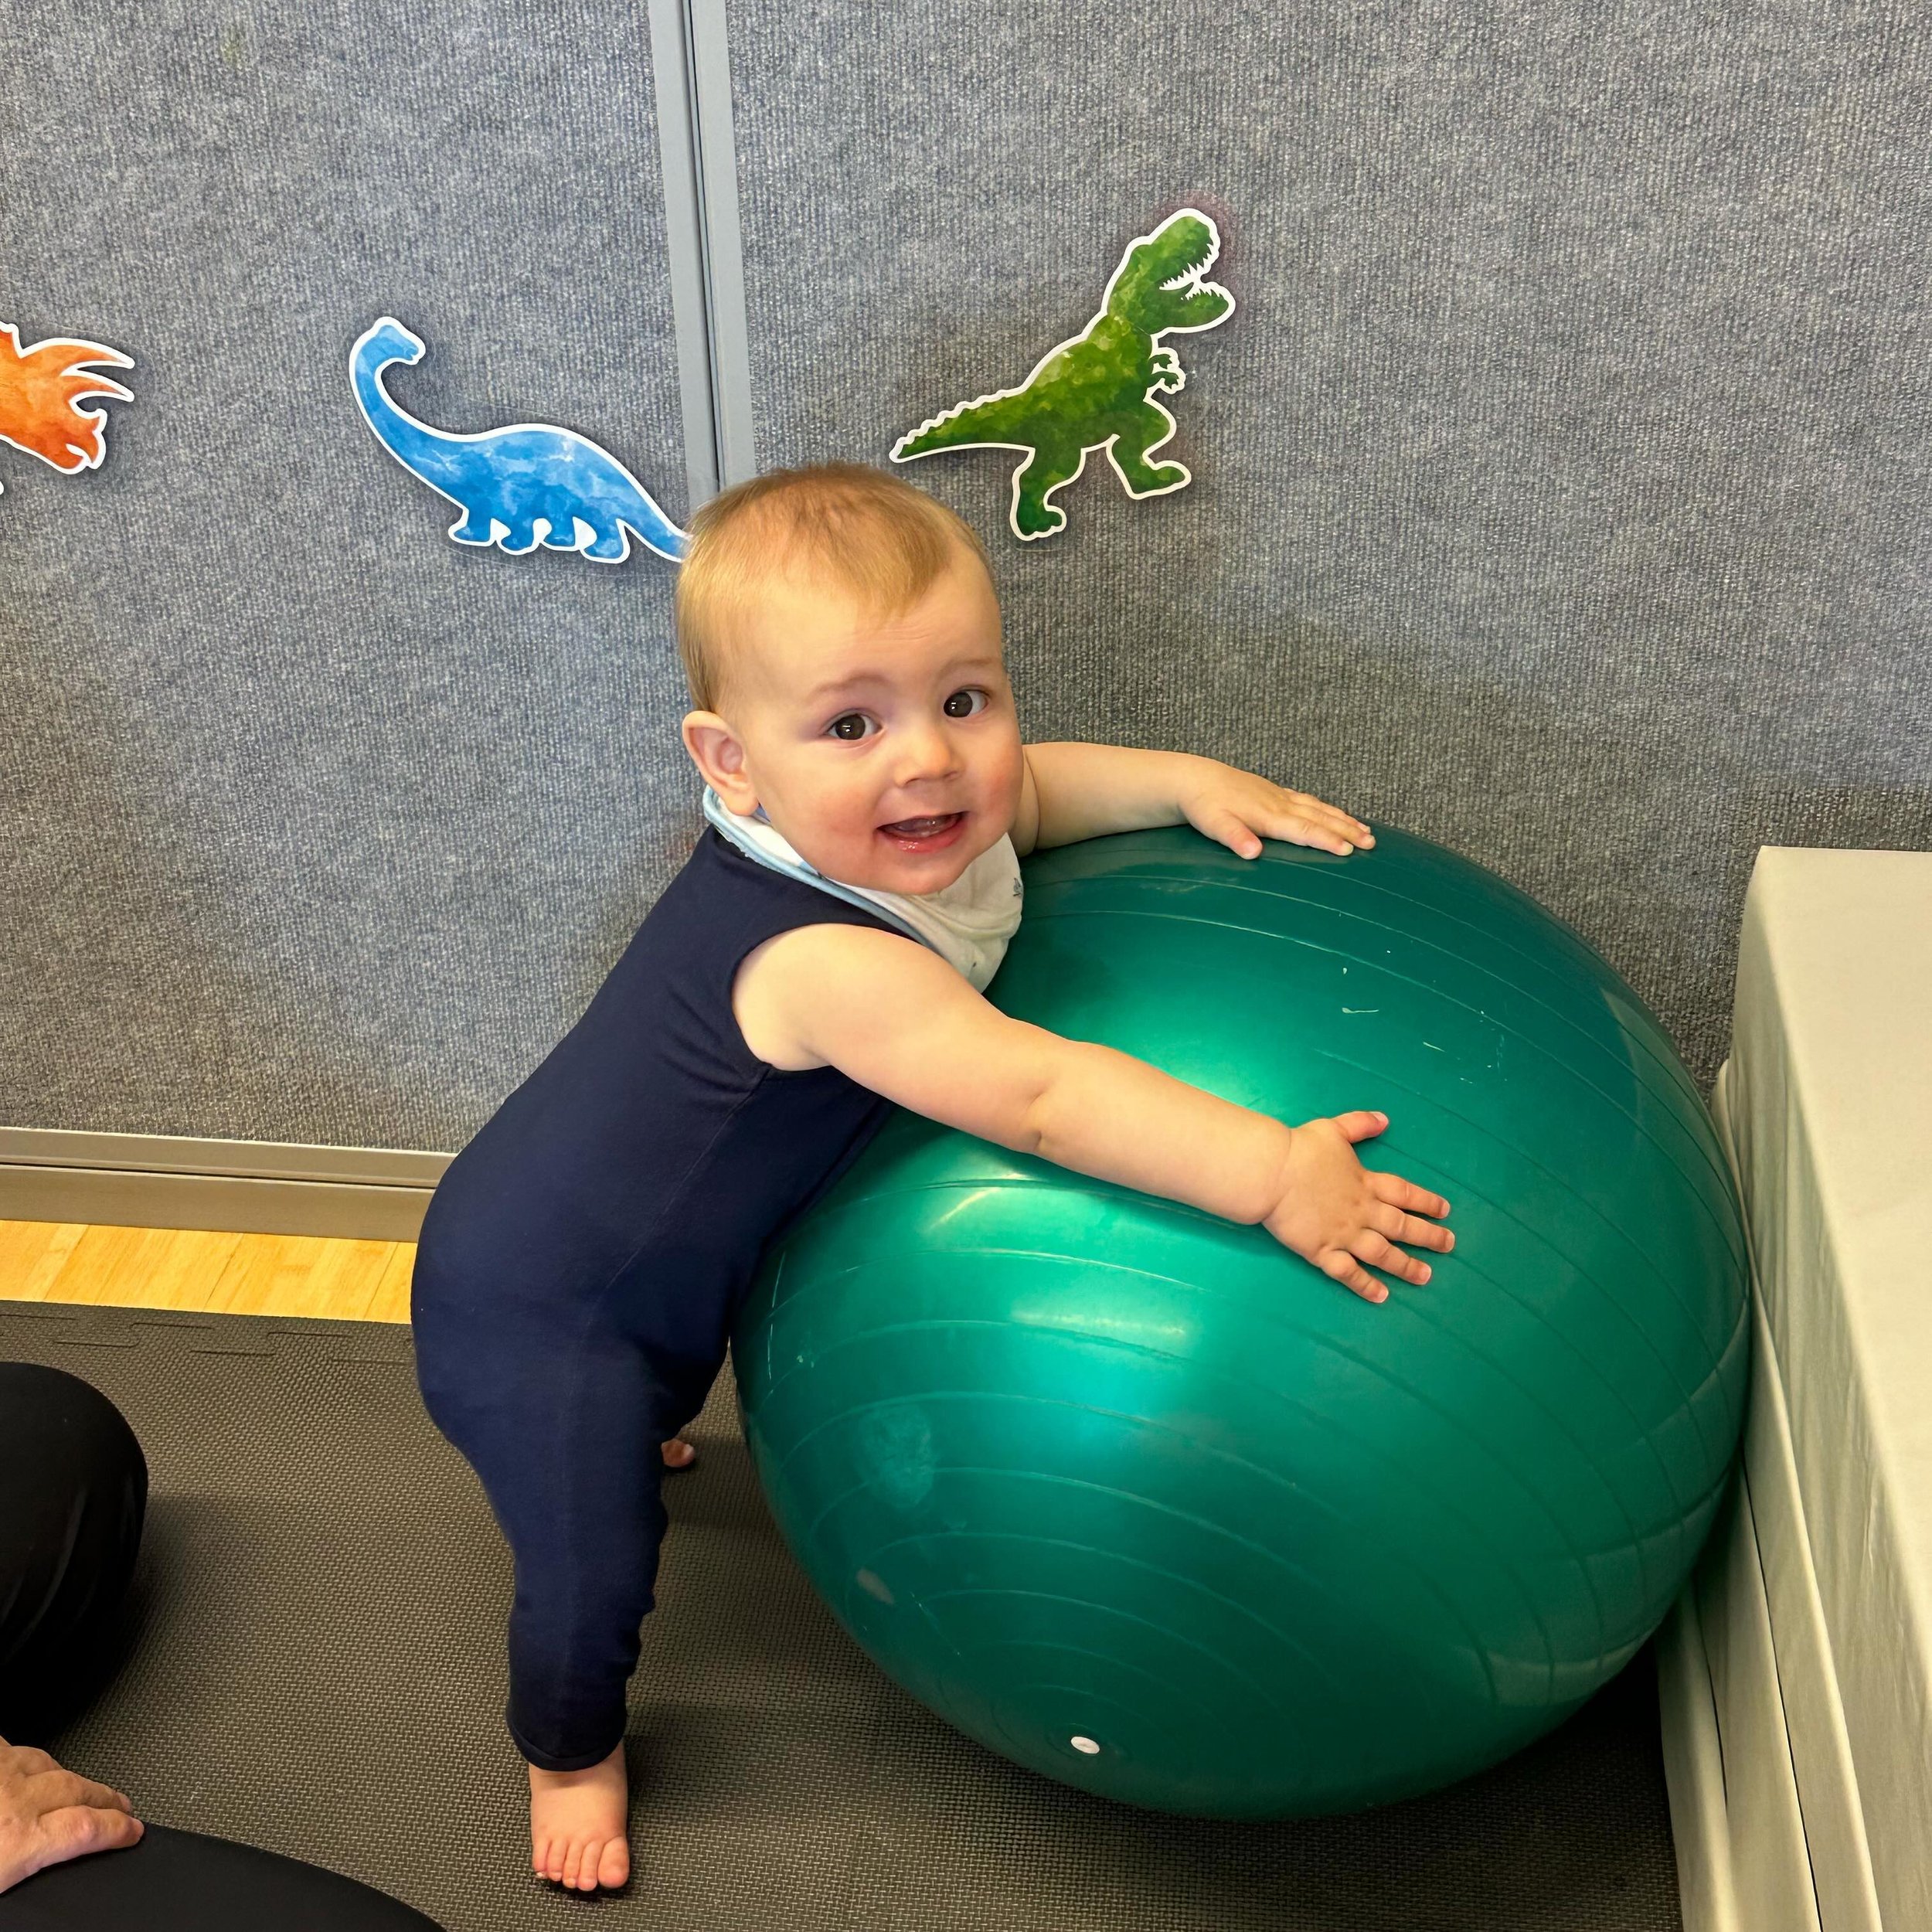 We&rsquo;re having a ball in classes! 

Drop-in this week and join the fun &amp; learning. Spots available 0-5y👣